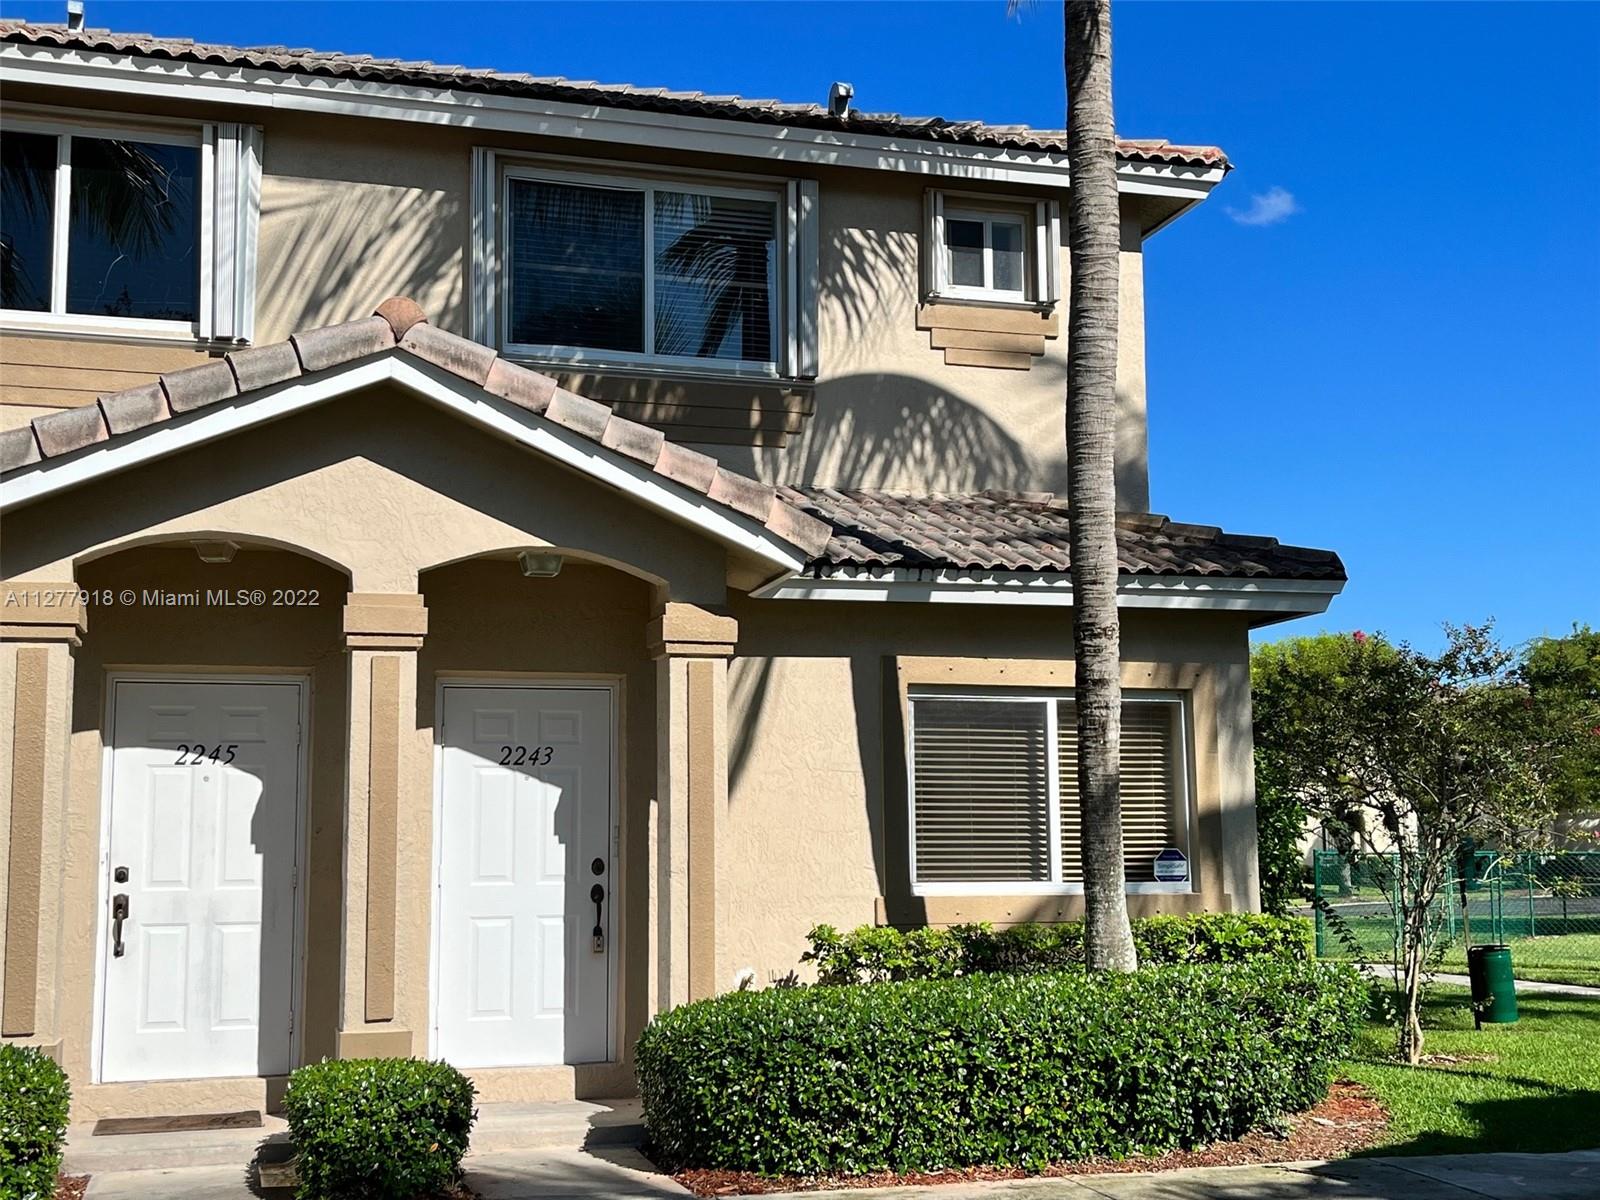 CORNER 2 BR/2.5 BA TOWNHOME IN GATED COMMUNITY OF KEYS GATE. 2 MASTER SUITES W/ LAUNDRY ROOM UPSTAIRS. NO NEIGHBORS TO THE REAR. CLOSE TO POOL & PARK AREA. RENT INCLUDES BASIC ATT UVERSE CABLE & INTERNET, PEST CONTROL & SECURITY.